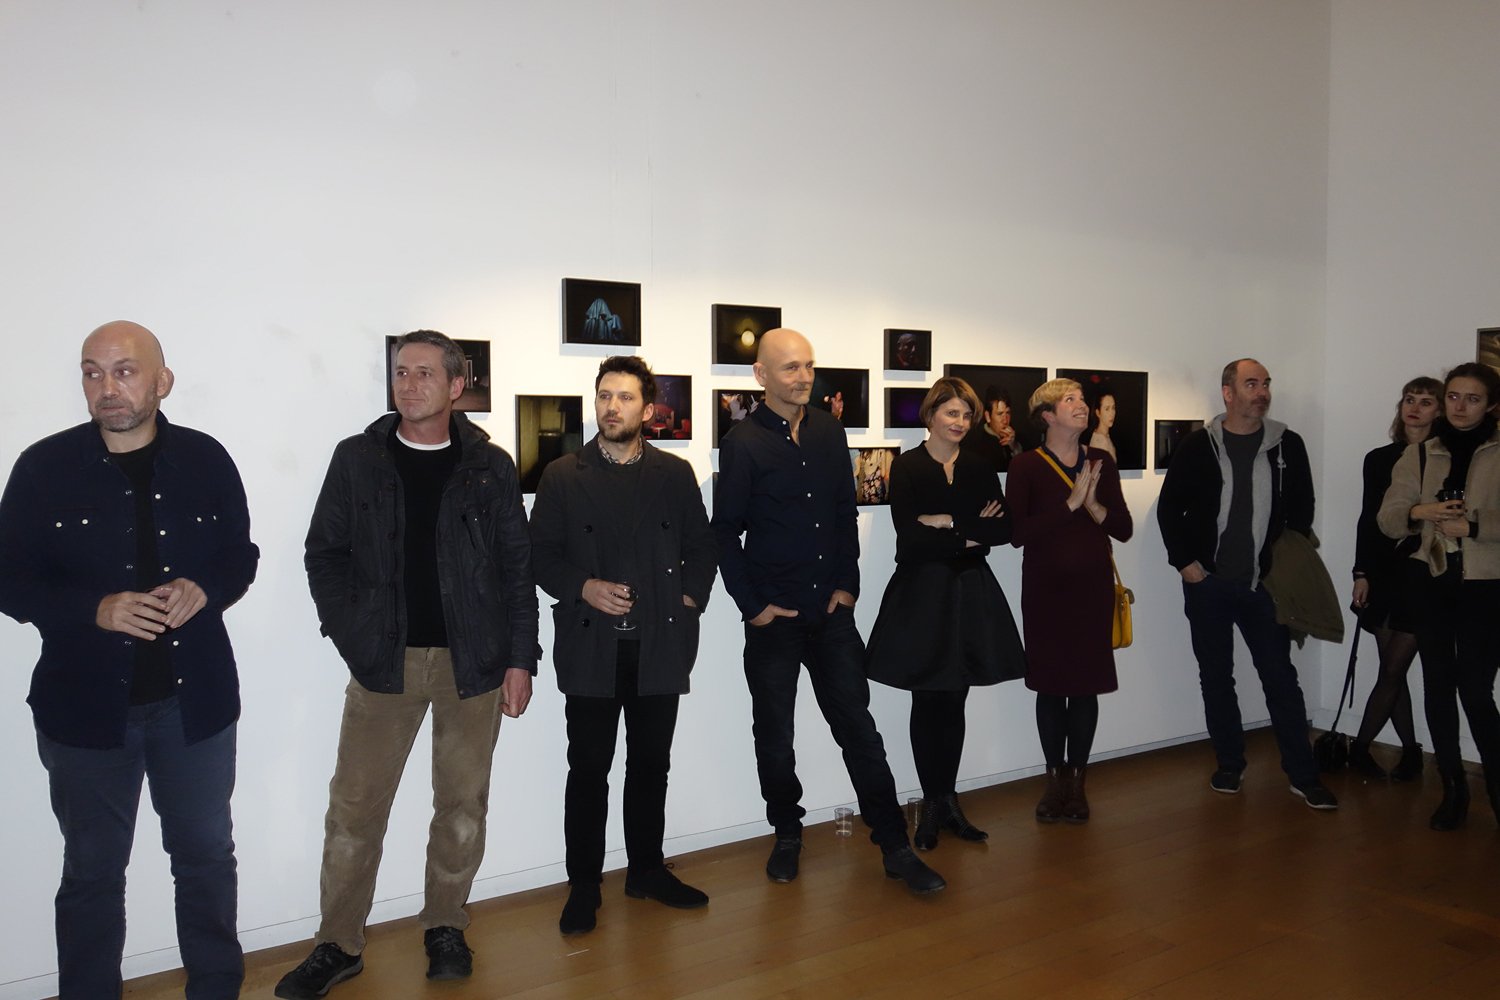  The Solas Artists at the exhibition  